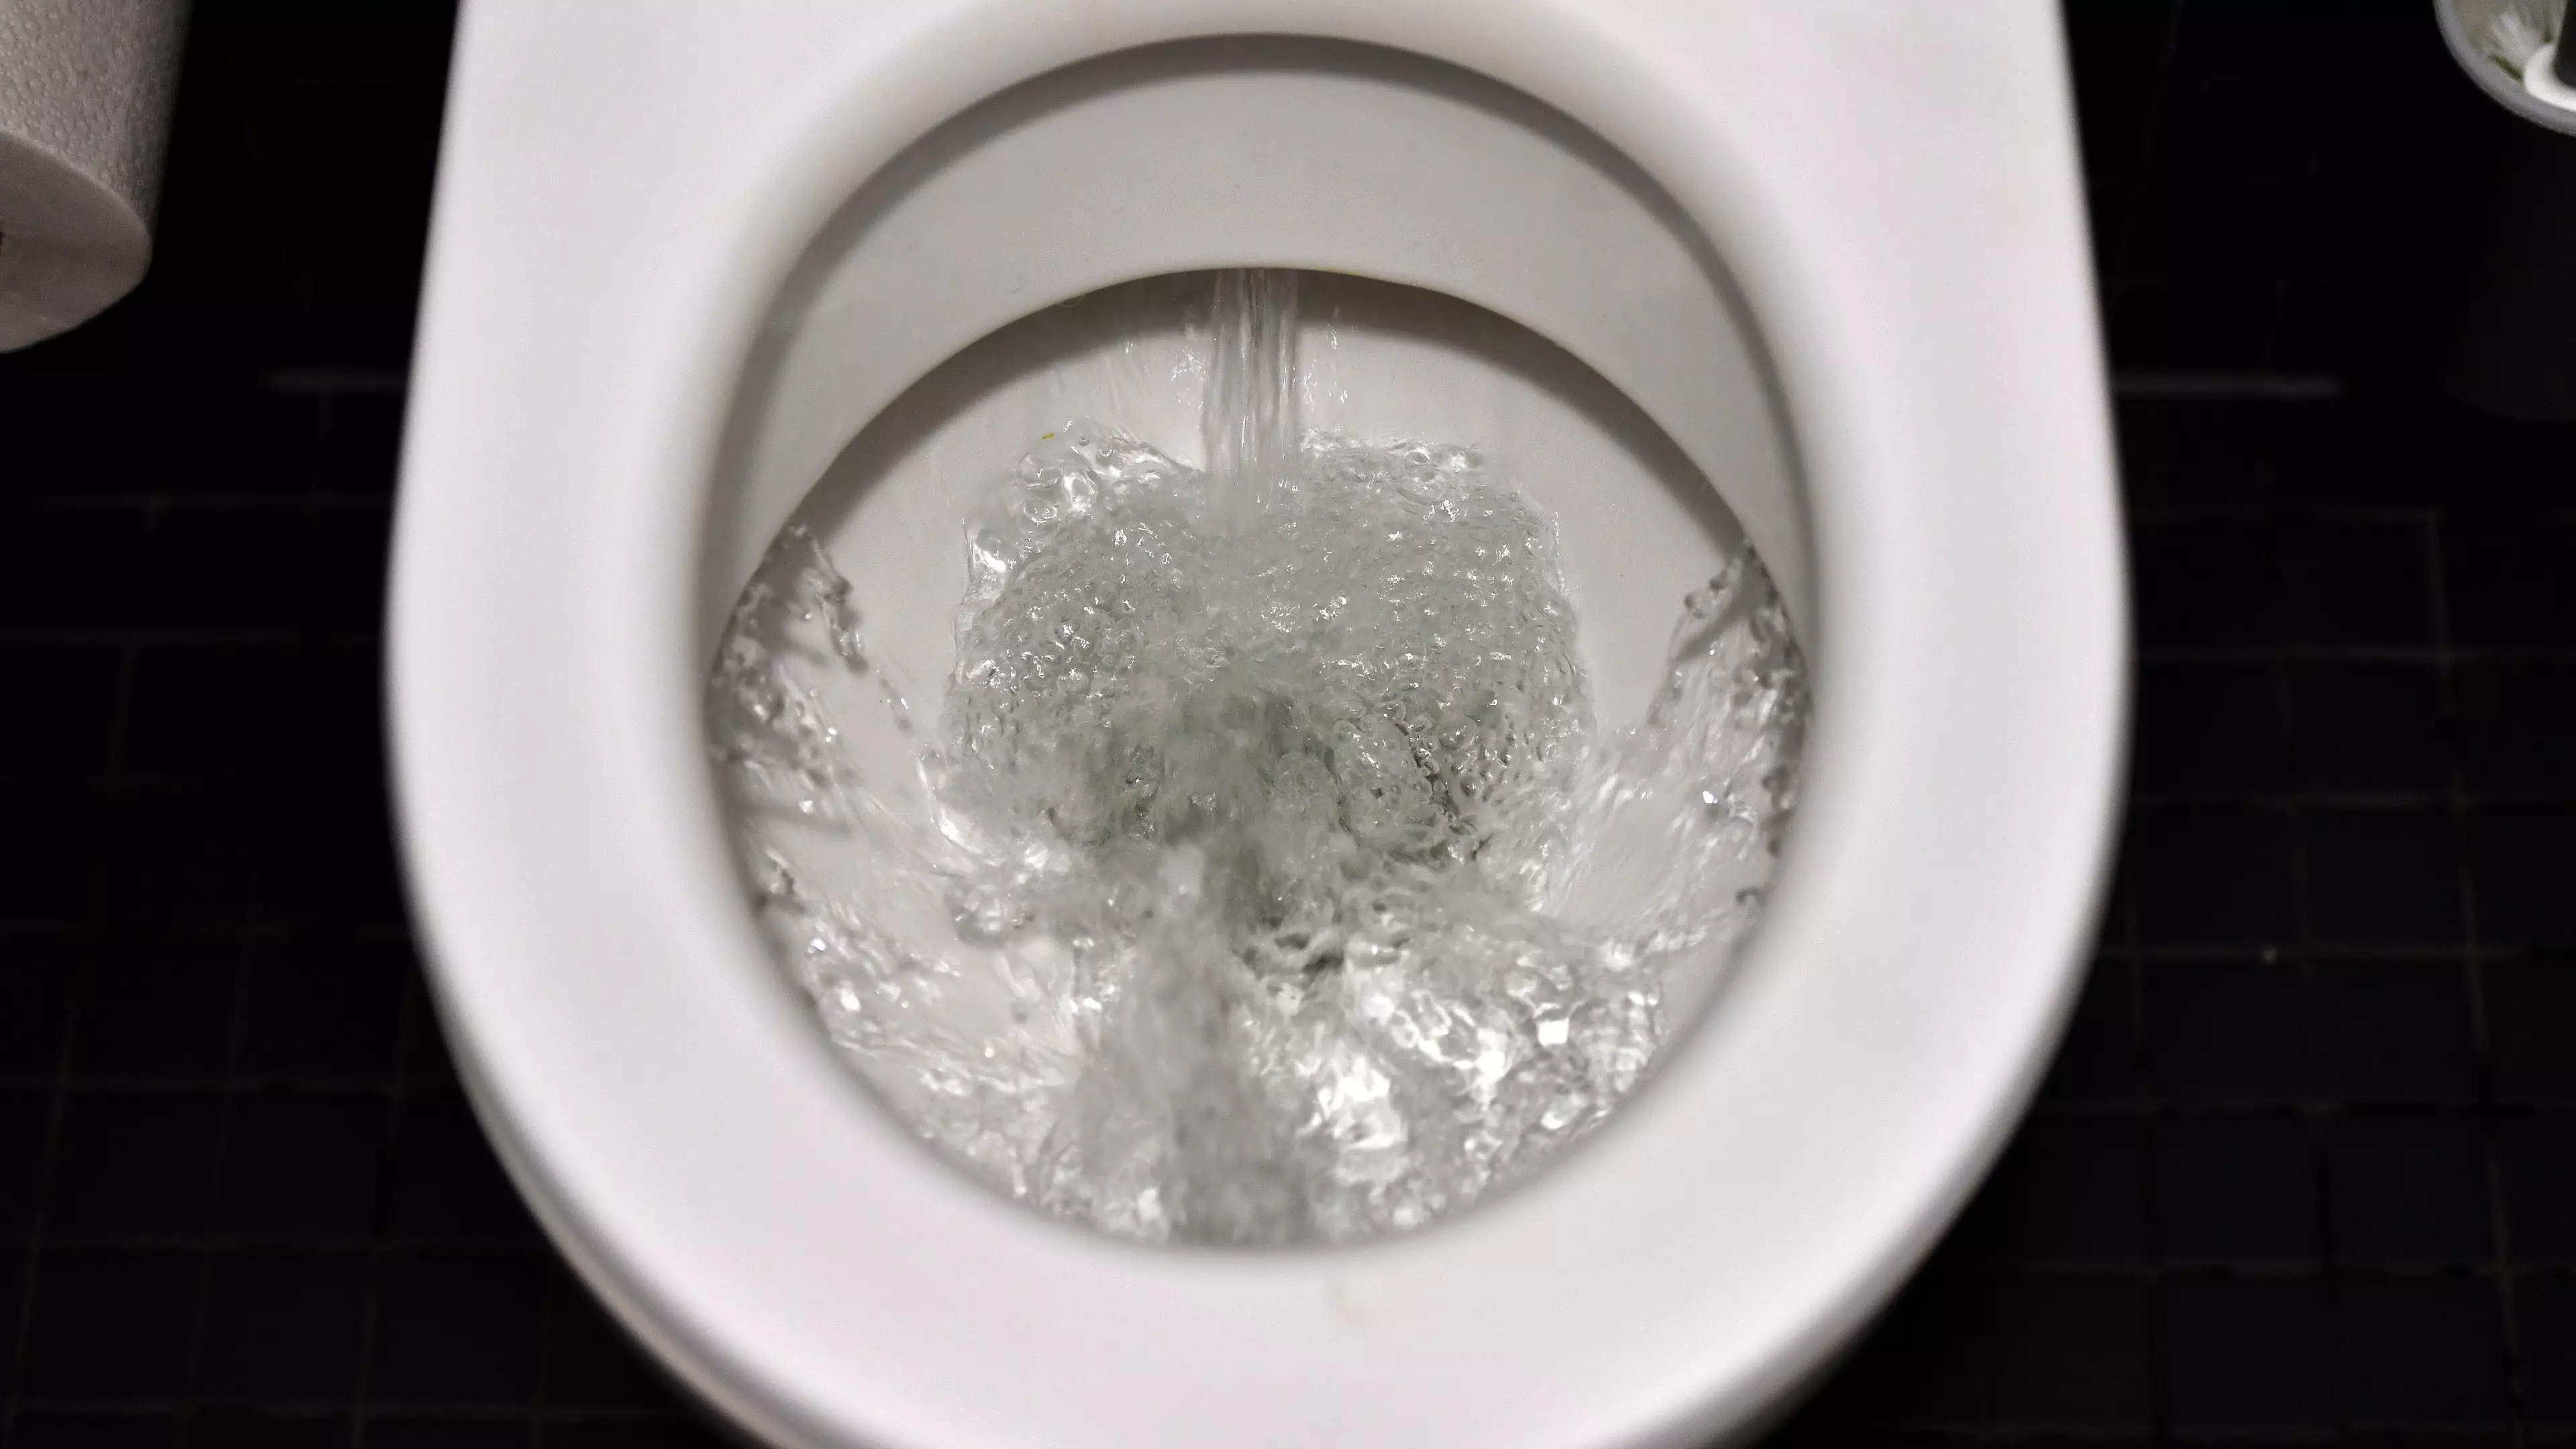 Scientists Create Super Slippery Toilet Coating That Stops Poop From Sticking